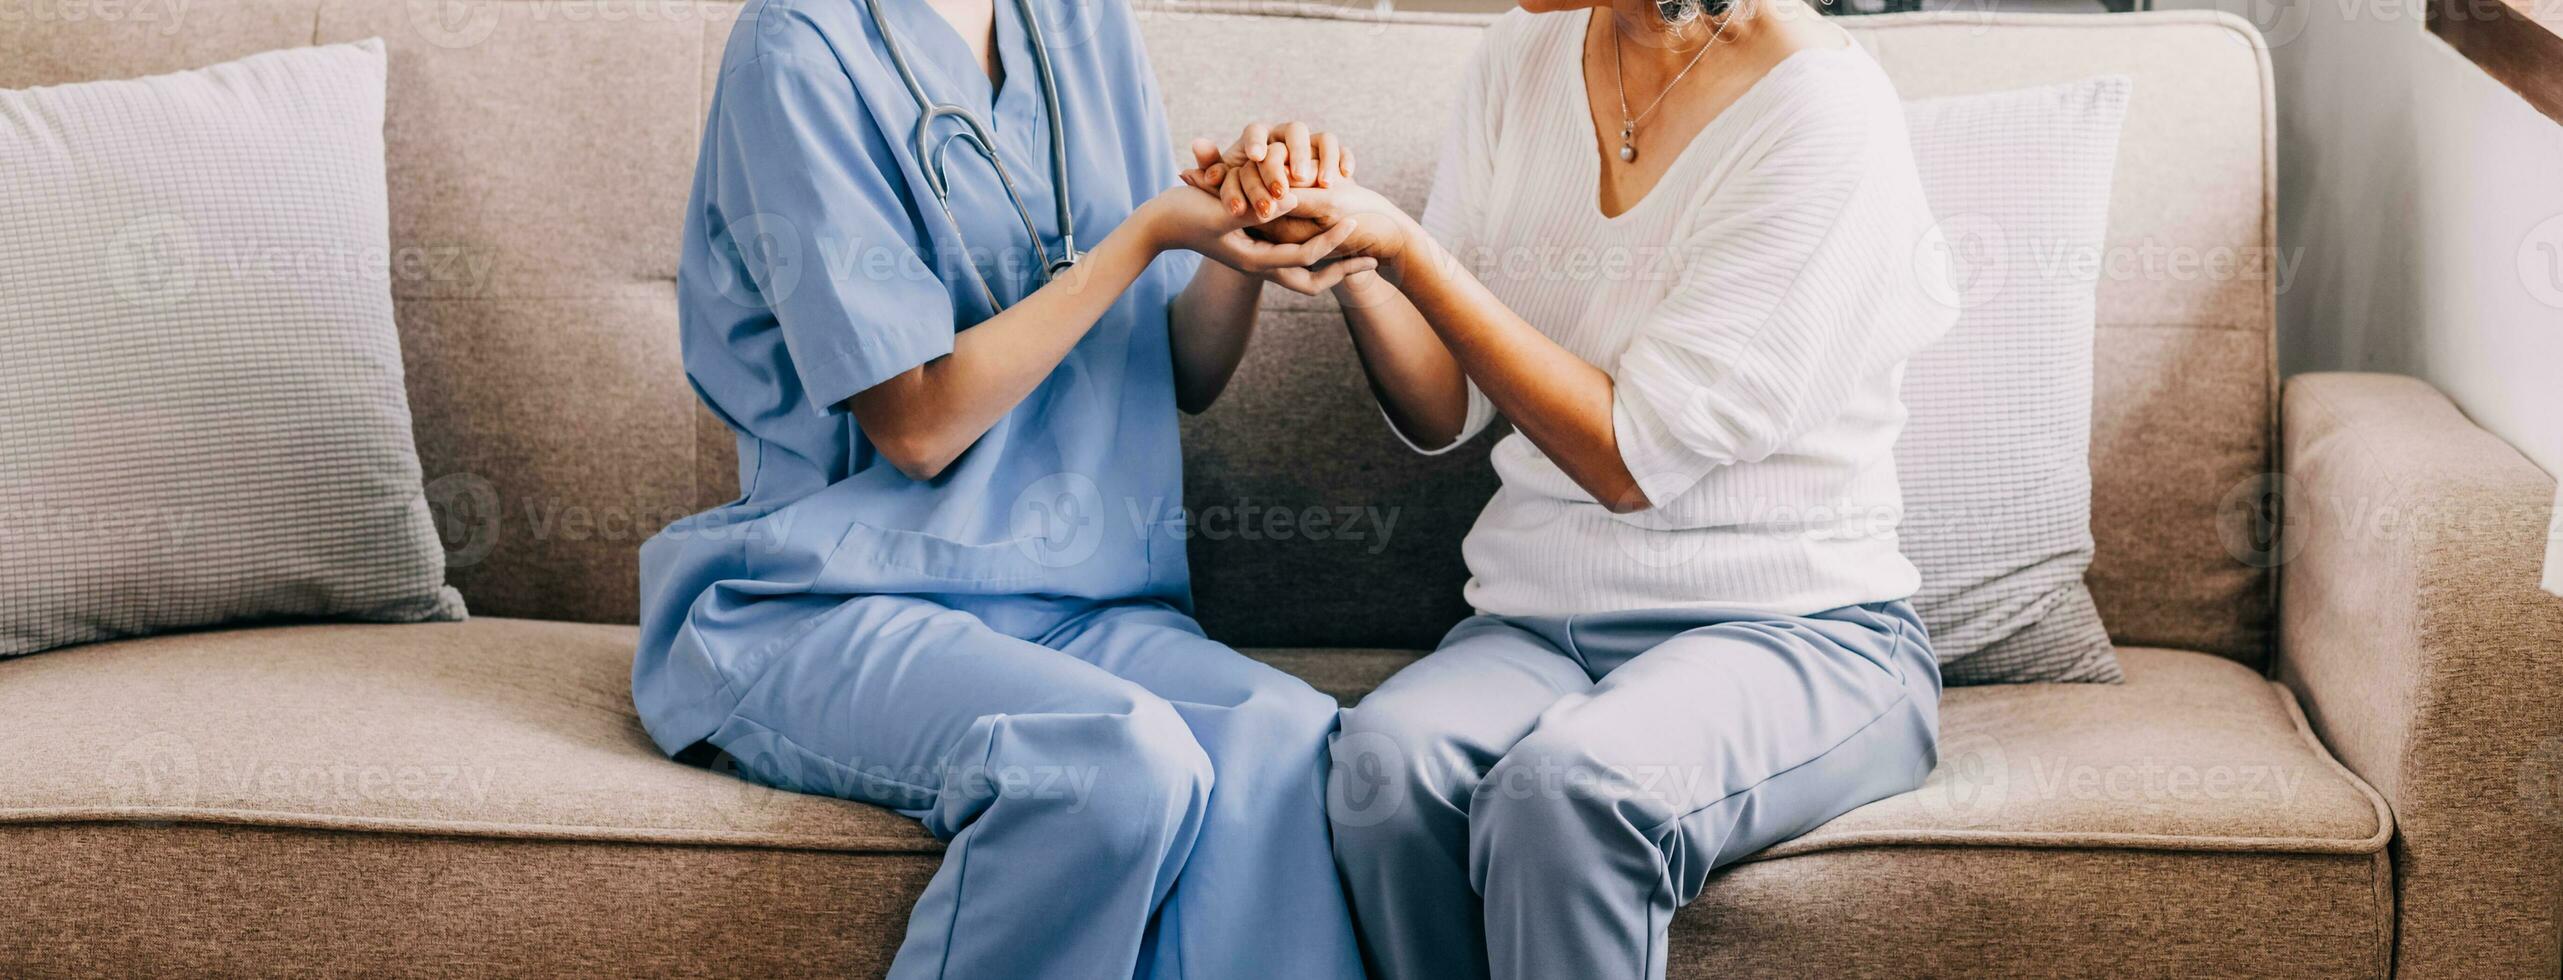 Happy senior woman visiting doctor, getting optimistic news after medical checkup, therapy. Therapist holding hand of old patient, giving hope, support, congratulating on goor treatment result photo